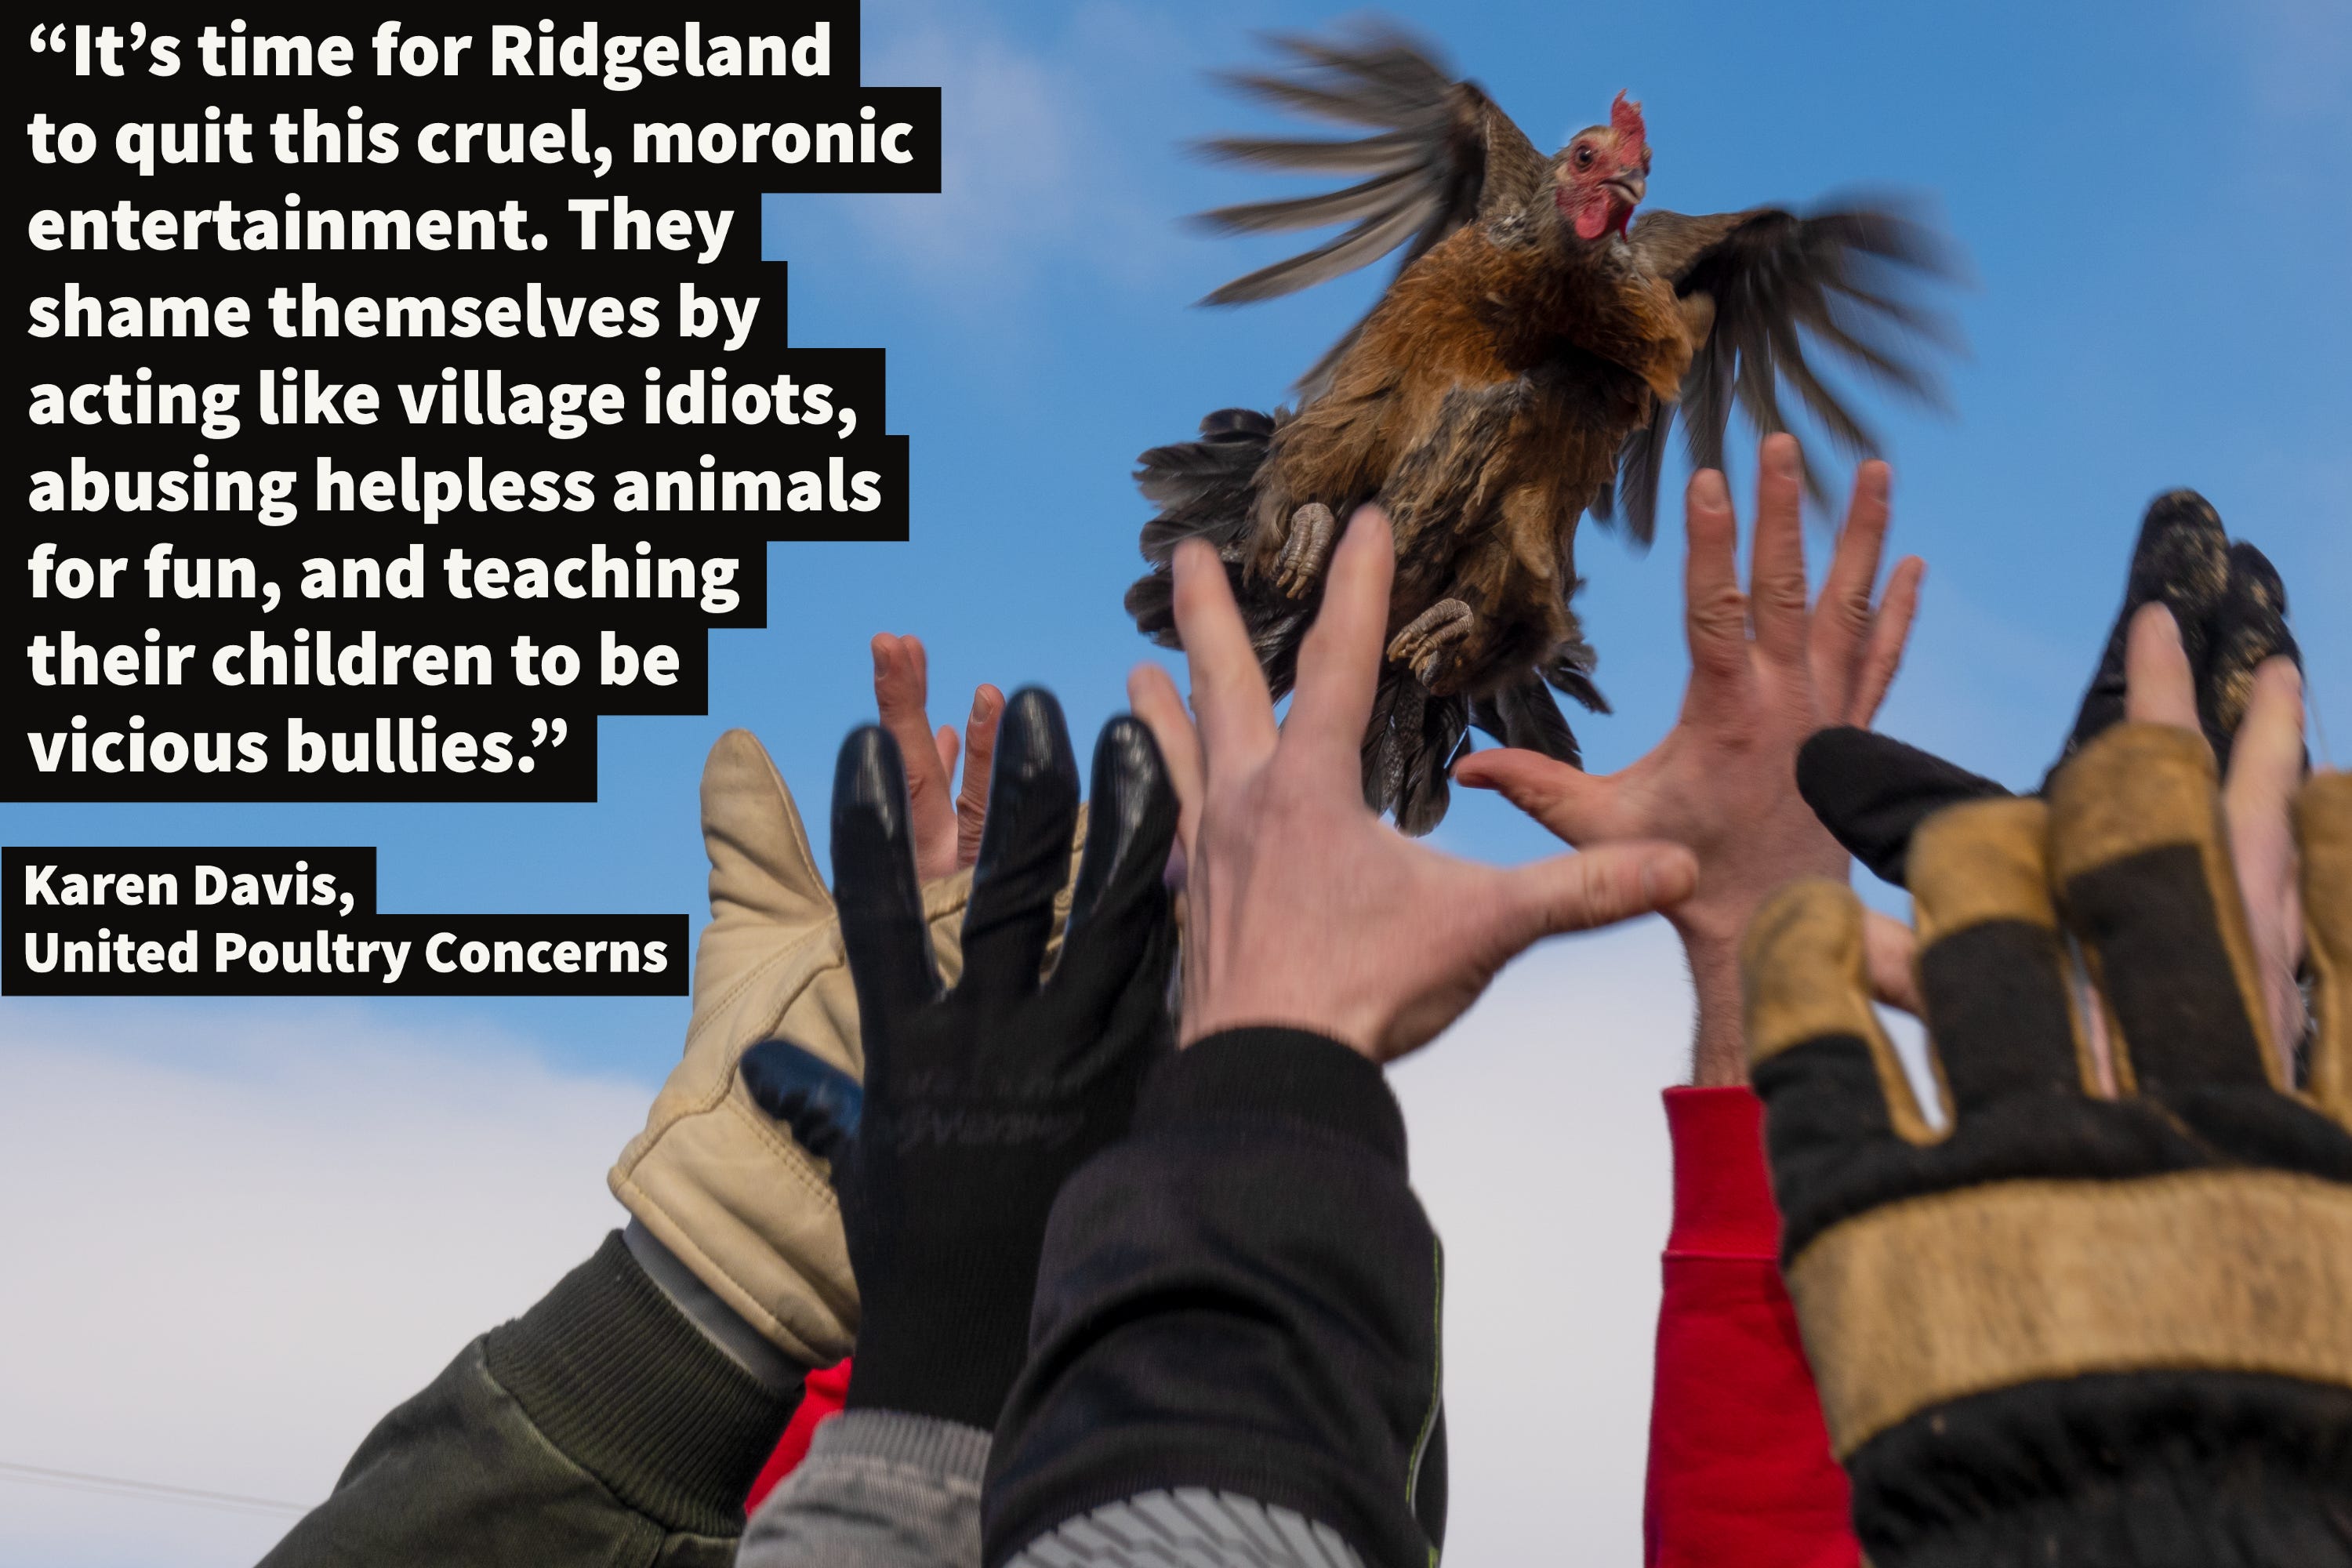 It's time for Ridgeland to quit this cruel, moronic entertainment. 
    They shame themselves by acting like village idiots, abusing helpless animals
    for fun, and teaching their children to be vicious bullies?
    Karen Davis, United Poultry Concerns